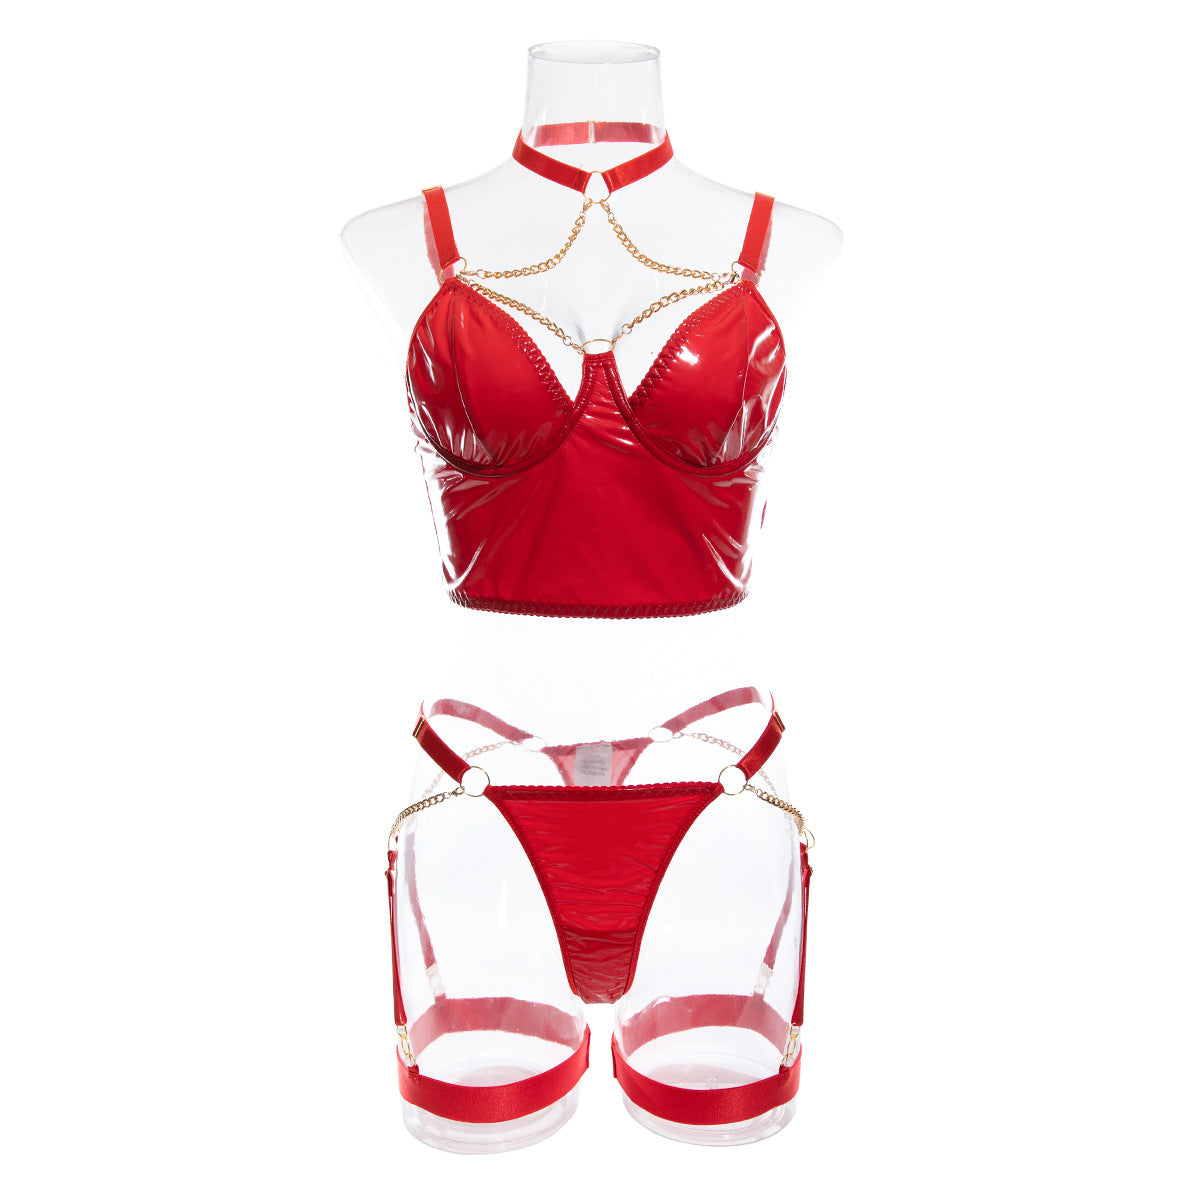 Scarlet Seduction: Glossy Lacquered Red Lingerie Set